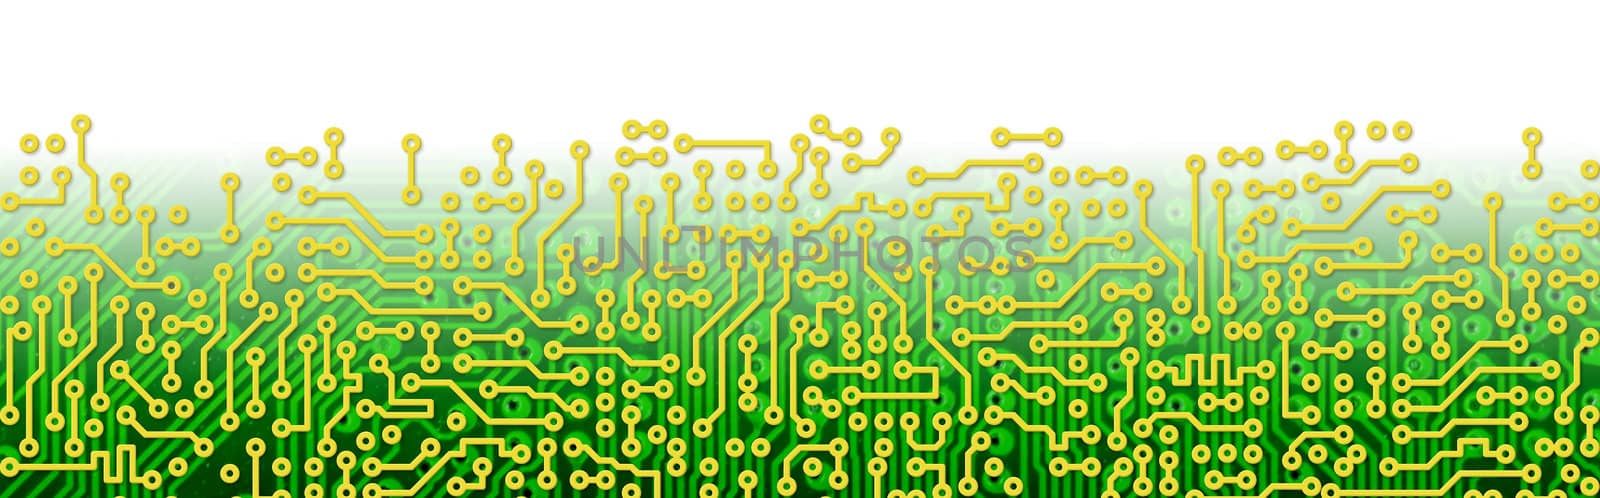 Green circuit board graphical border by pzaxe